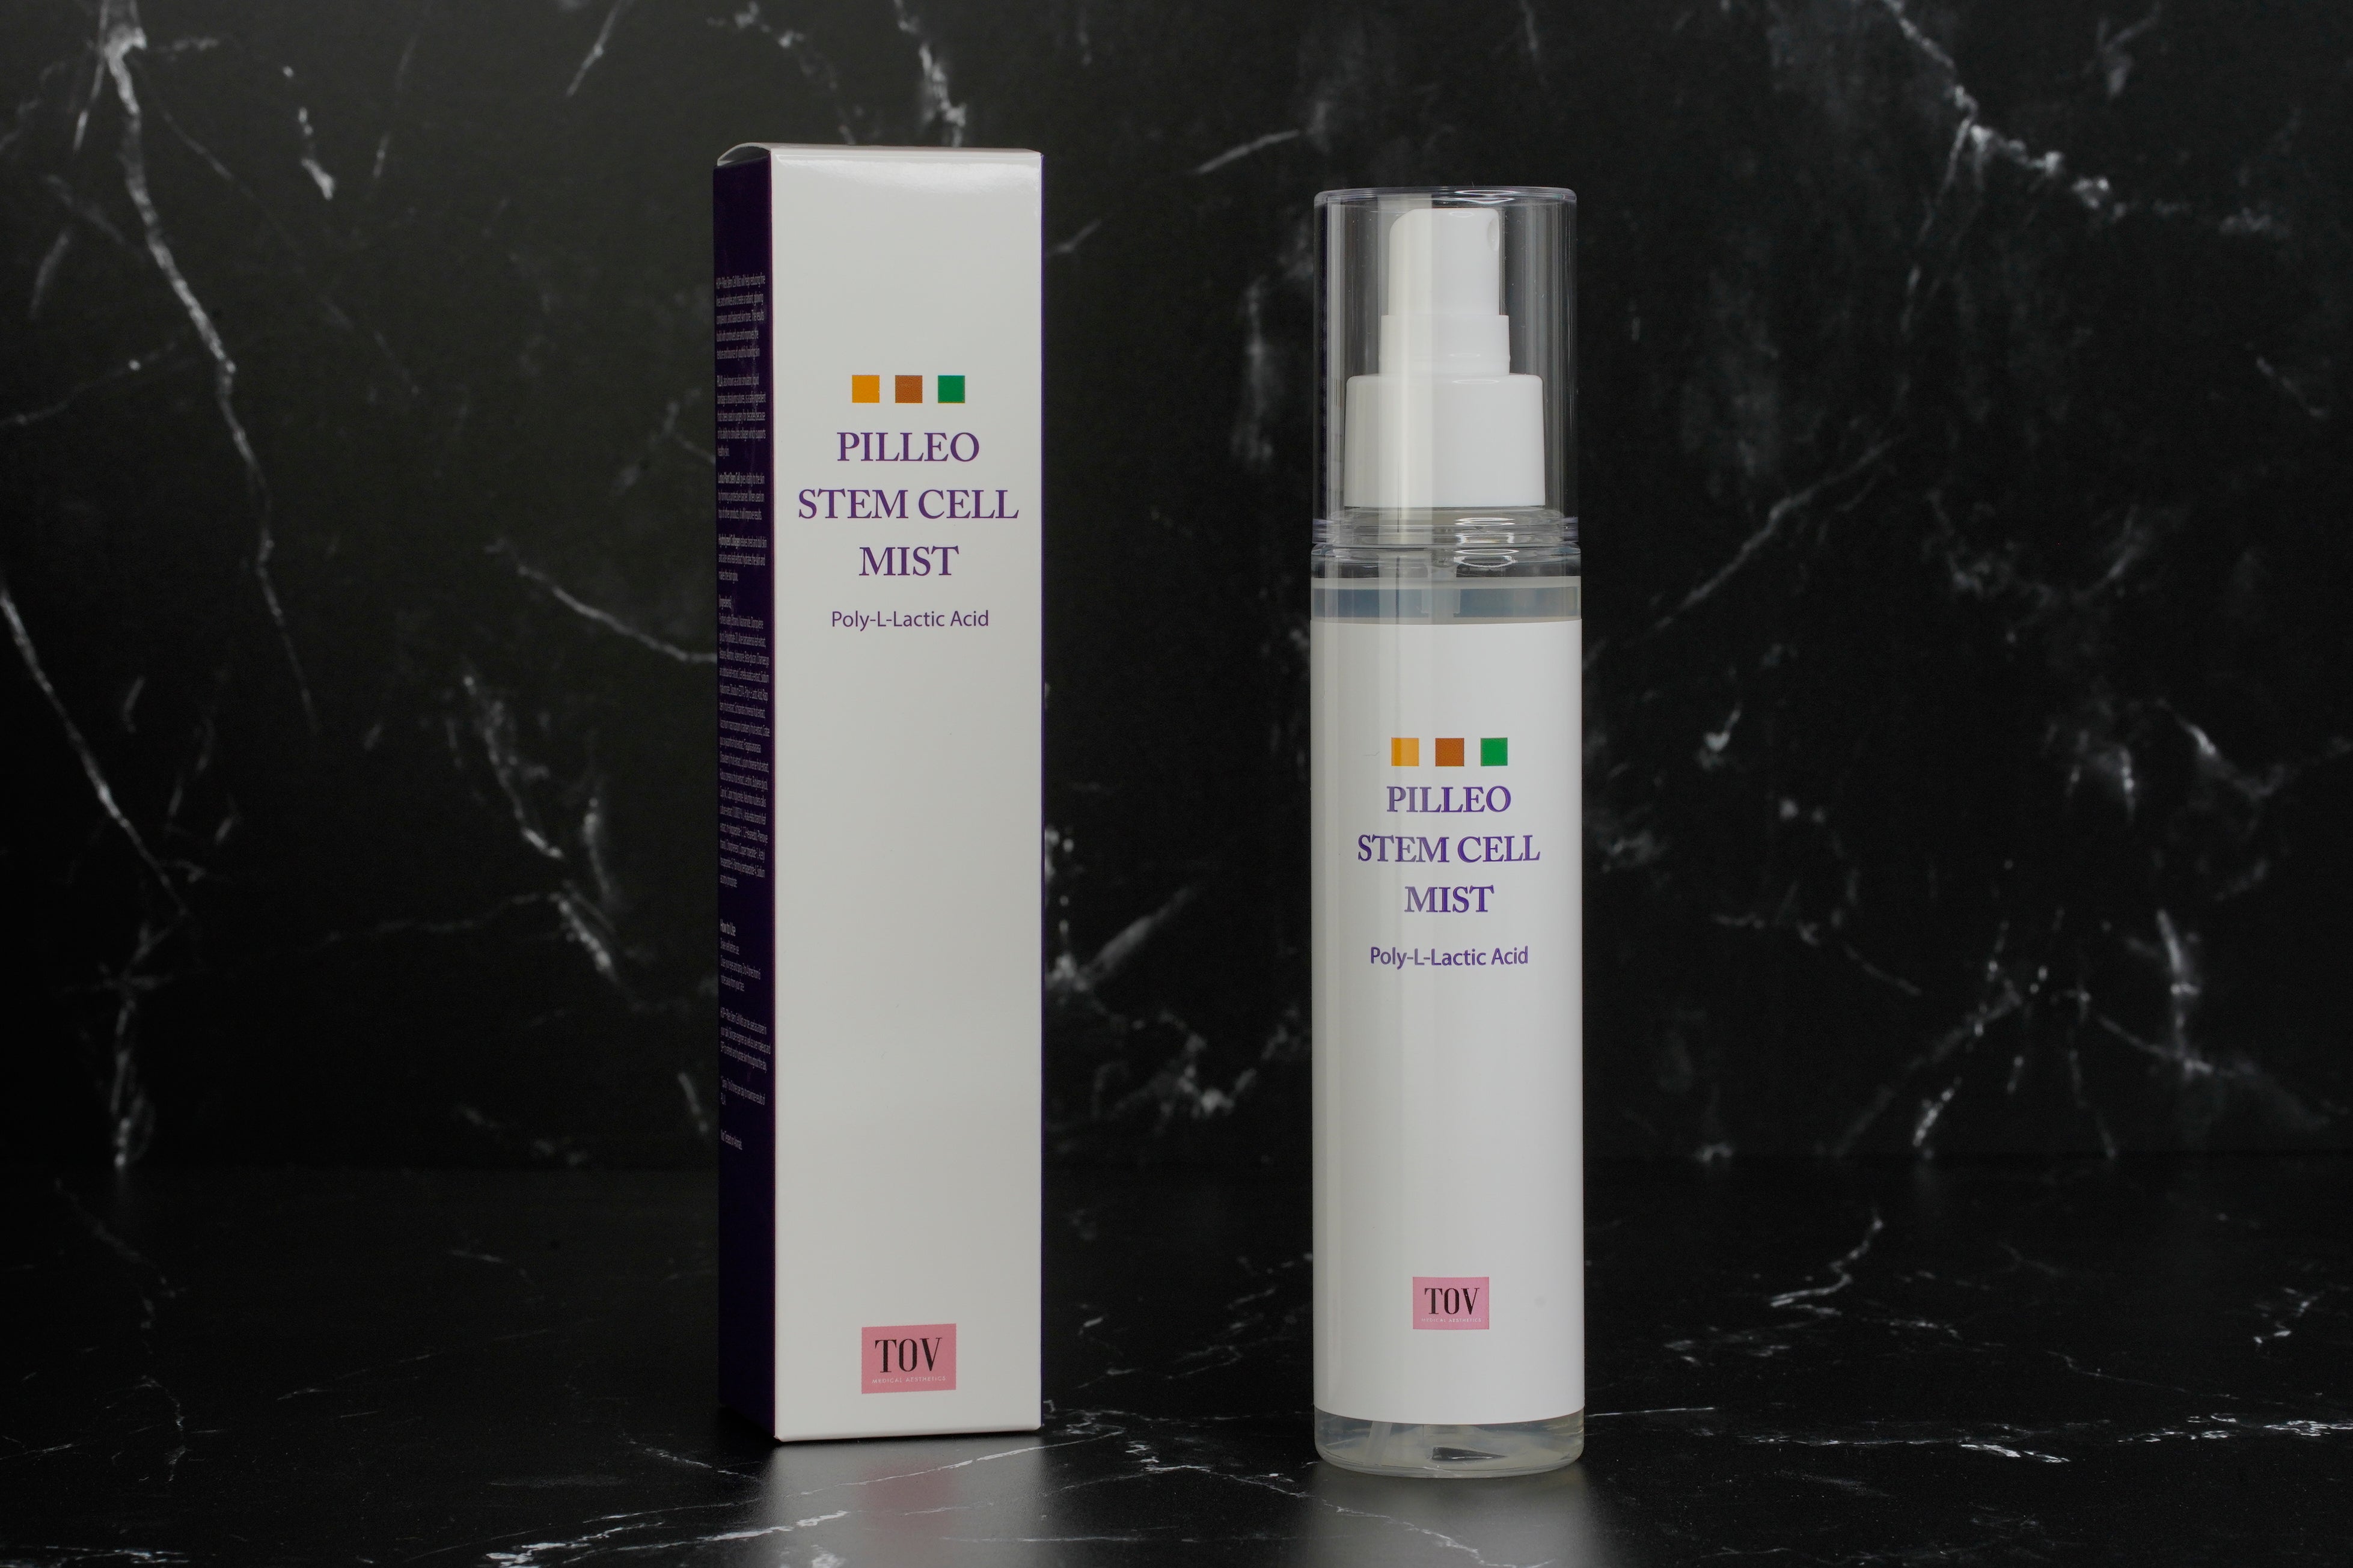 HOUSE OF PLLA® HOP+ Pilleo Stem Cell Mist 120ml Retail $90 - SPECIAL OFFER